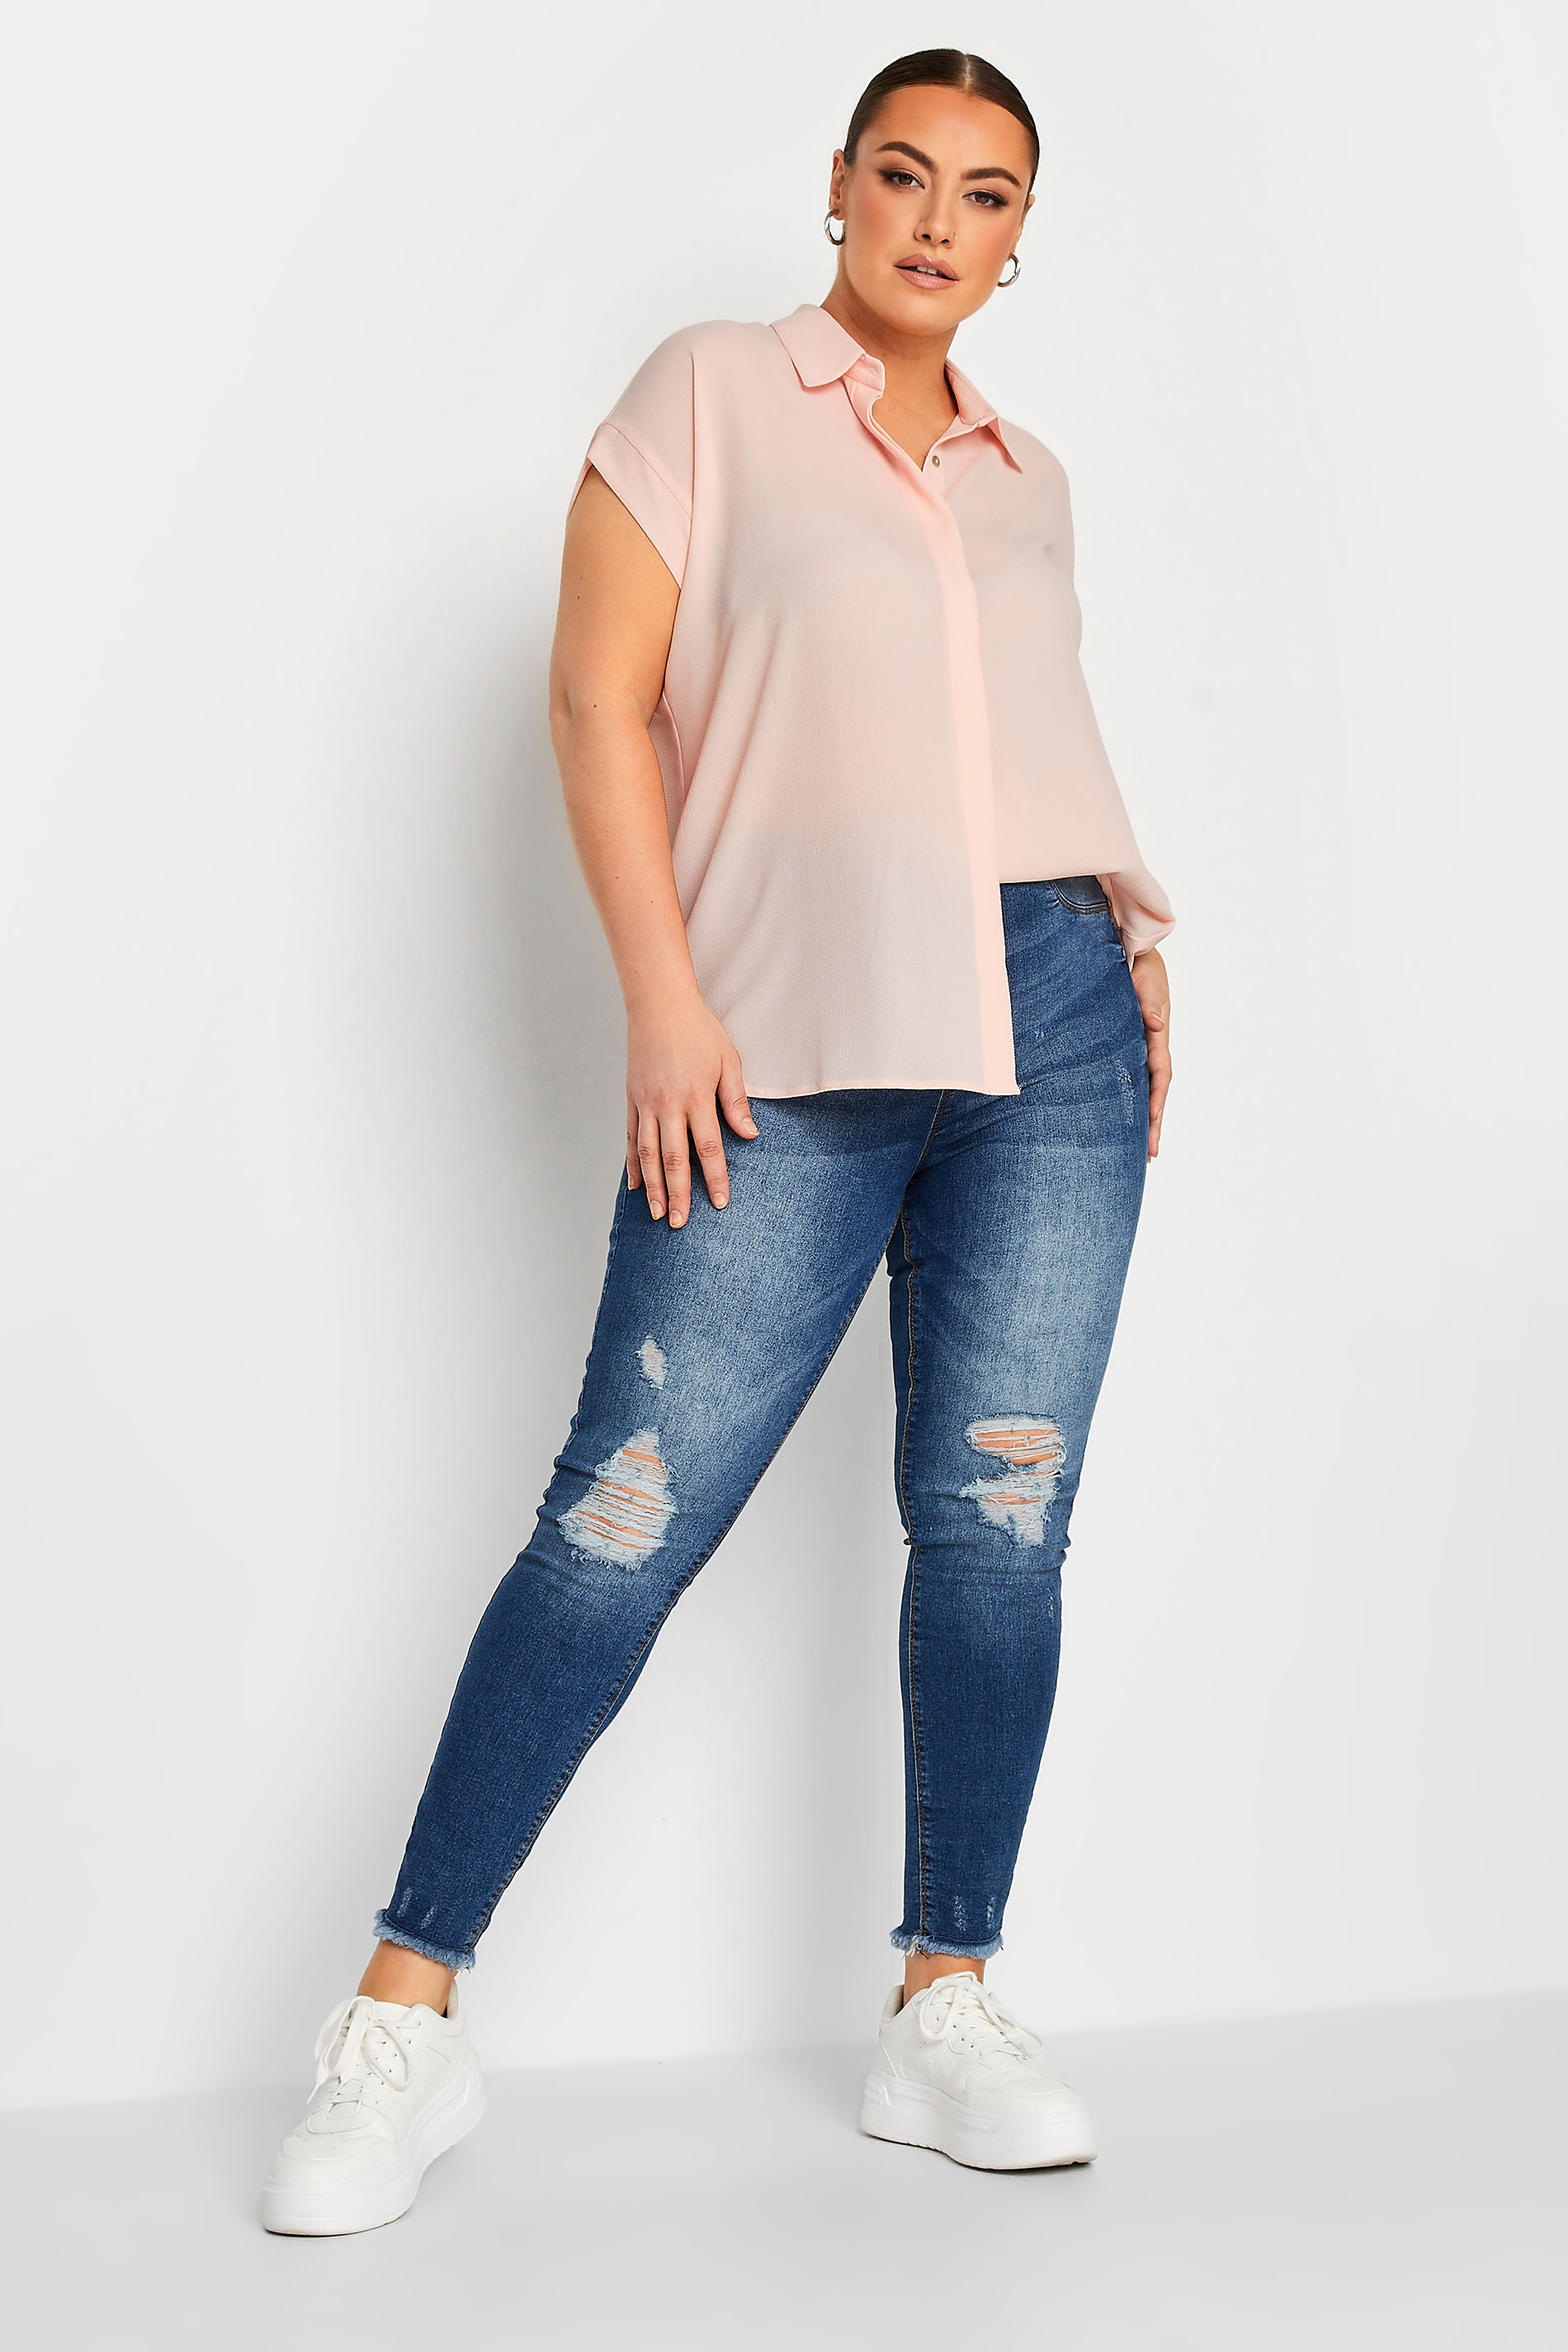 YOURS Plus Size Pink Short Sleeve Shirt | Yours Clothing 2